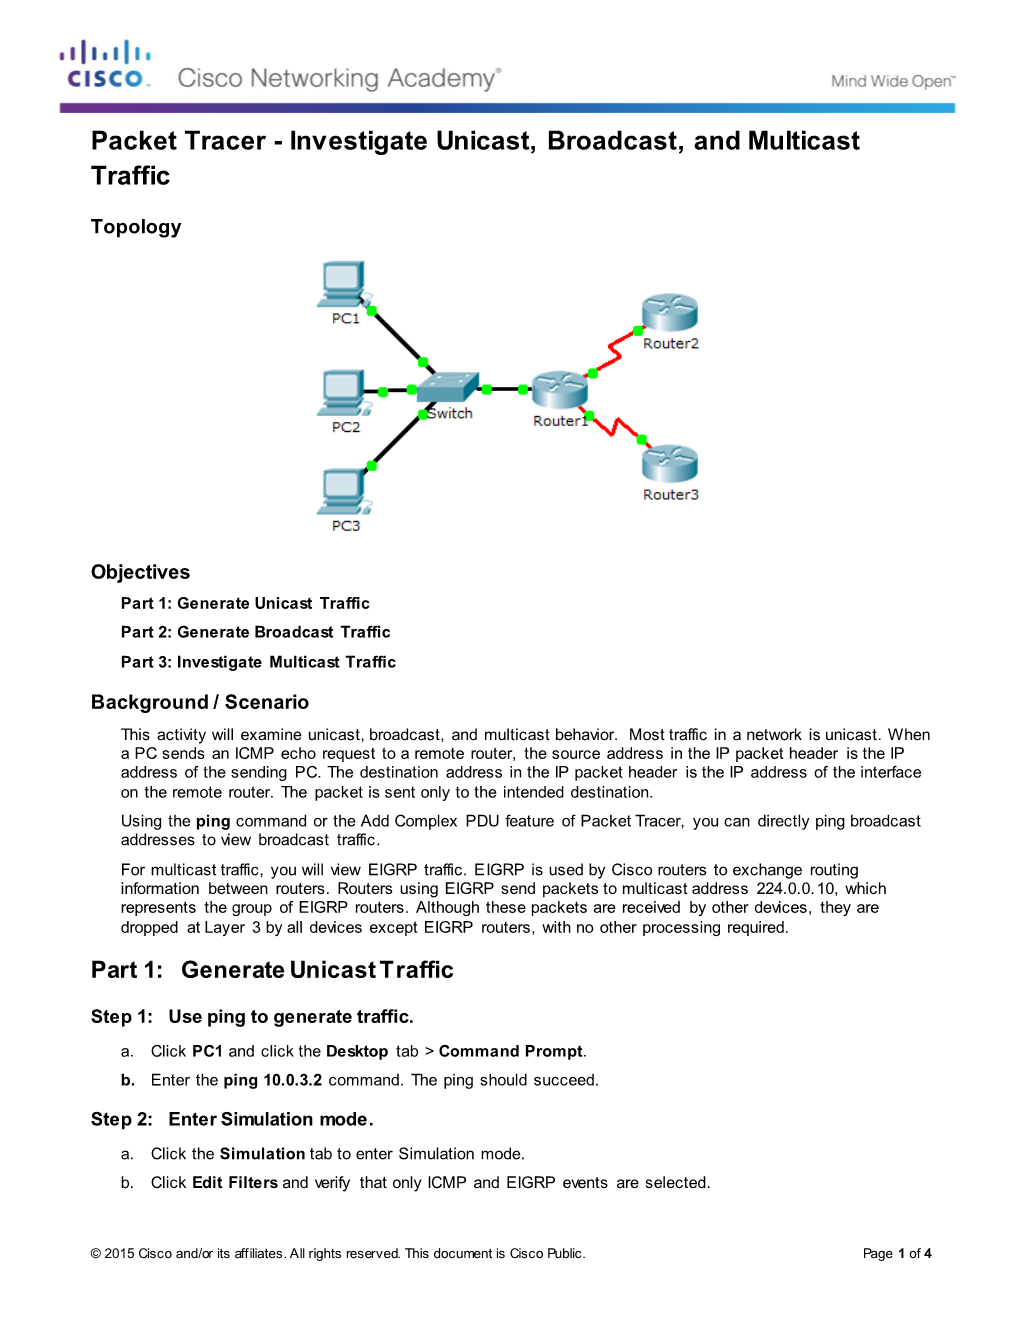 Packet Tracer - Investigate Unicast, Broadcast, and Multicast Traffic